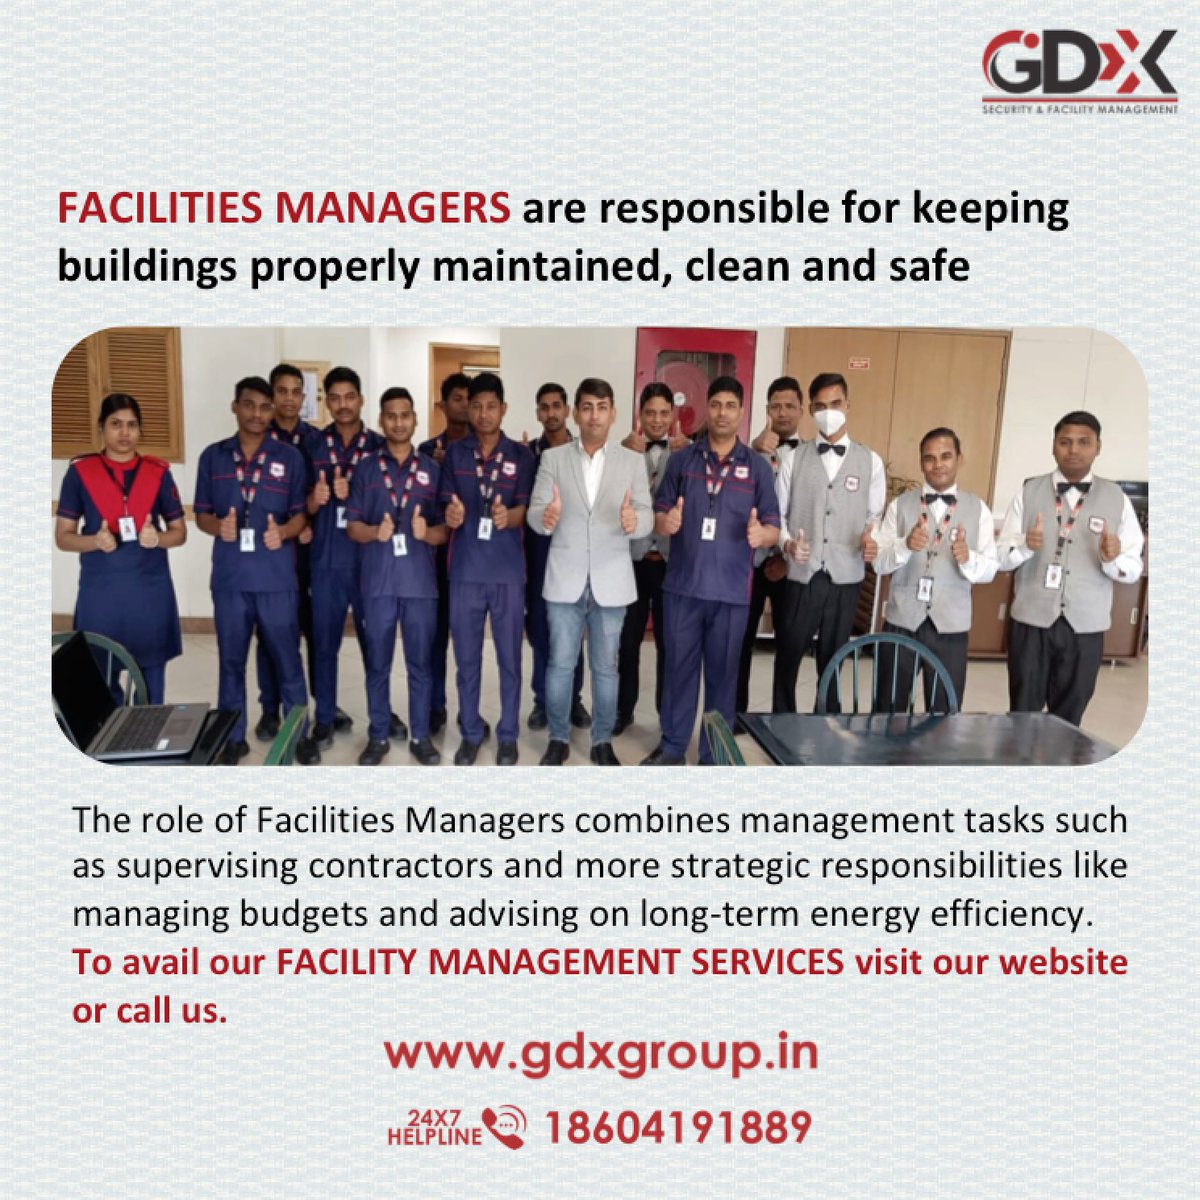 Facilities managers are responsible for keeping #buildings properly maintained, #clean, and #safe. 
TO AVAIL OF OUR FACILITY MANAGEMENT SERVICES, CALL US AT 24X7 HELPLINE 18604191889
 #GDXtech  #FacilityManagement #IntegratedFacilityManagementServices #FacilitiesManagers